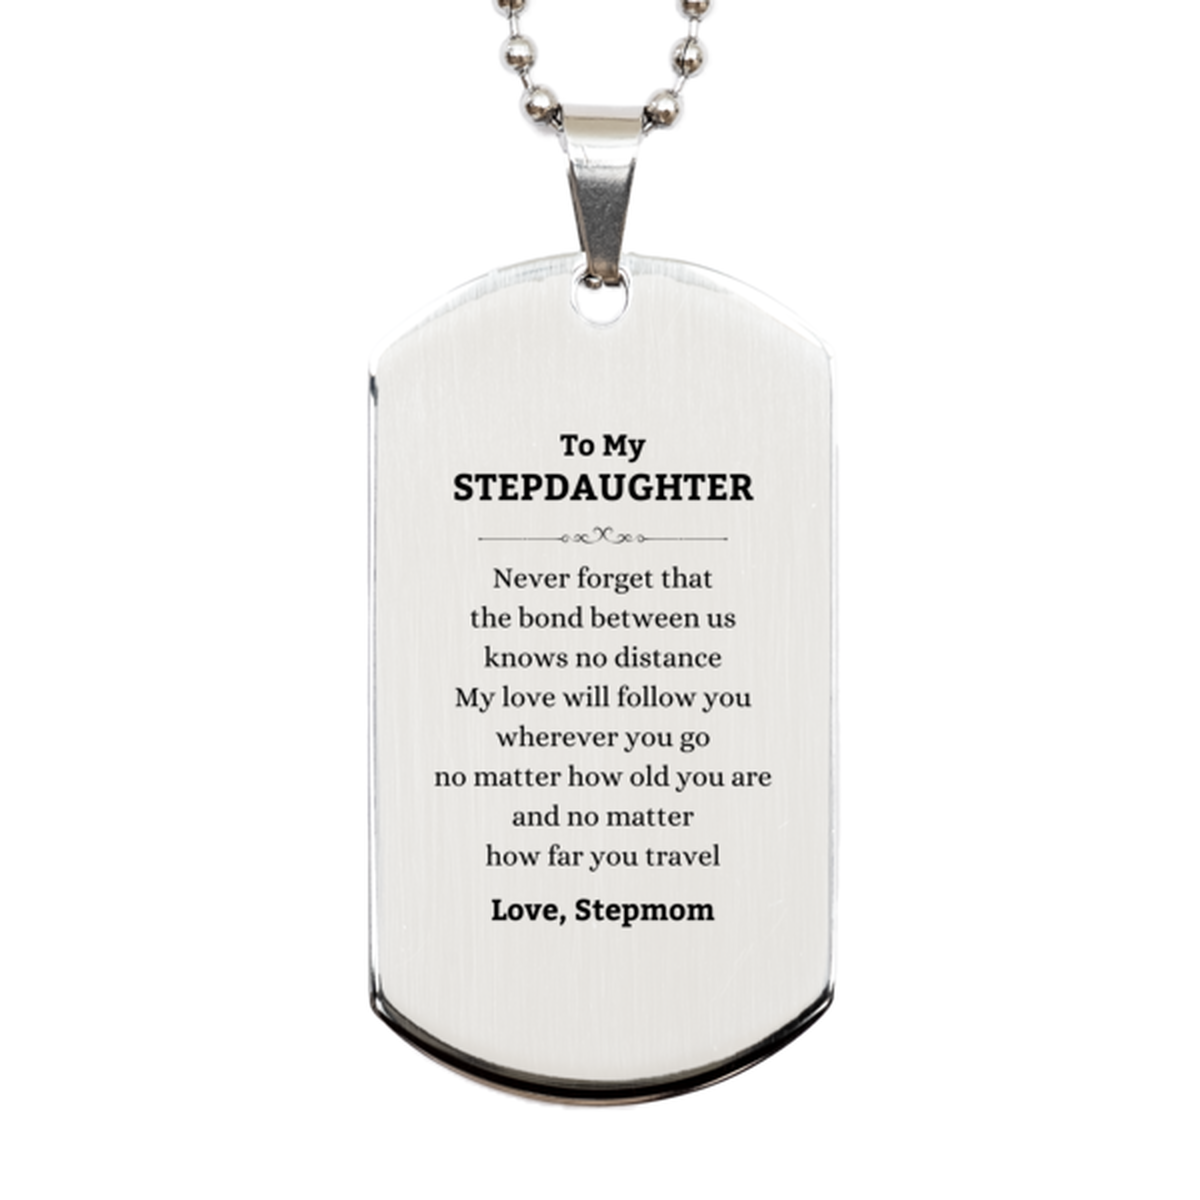 Stepdaughter Birthday Gifts from Stepmom, Adjustable Silver Dog Tag for Stepdaughter Christmas Graduation Unique Gifts Stepdaughter Never forget that the bond between us knows no distance. Love, Stepmom